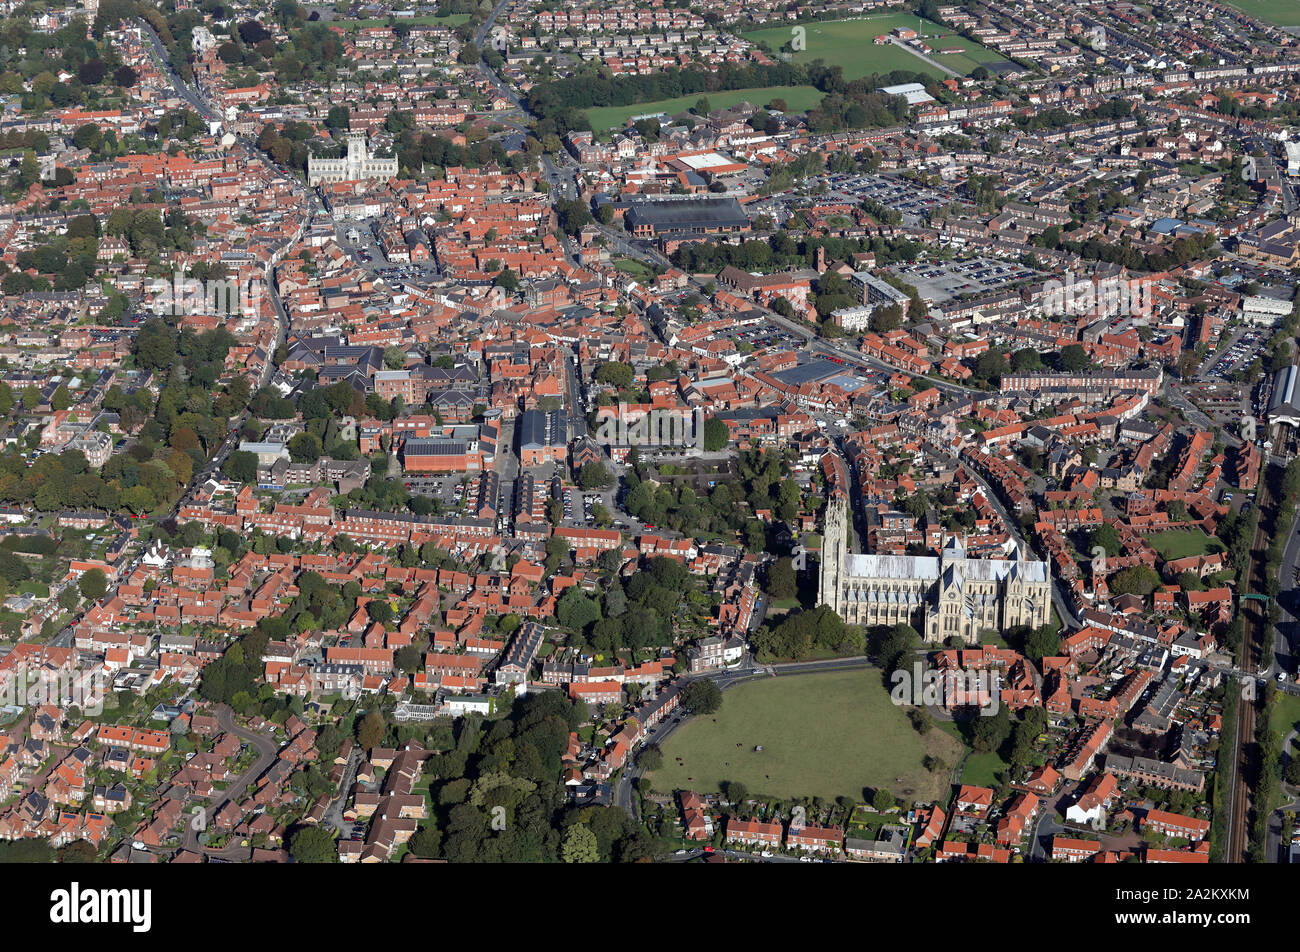 aerial view of Beverley, East Yorkshire showing both Beverley Minster and St Marys Church, UK Stock Photo